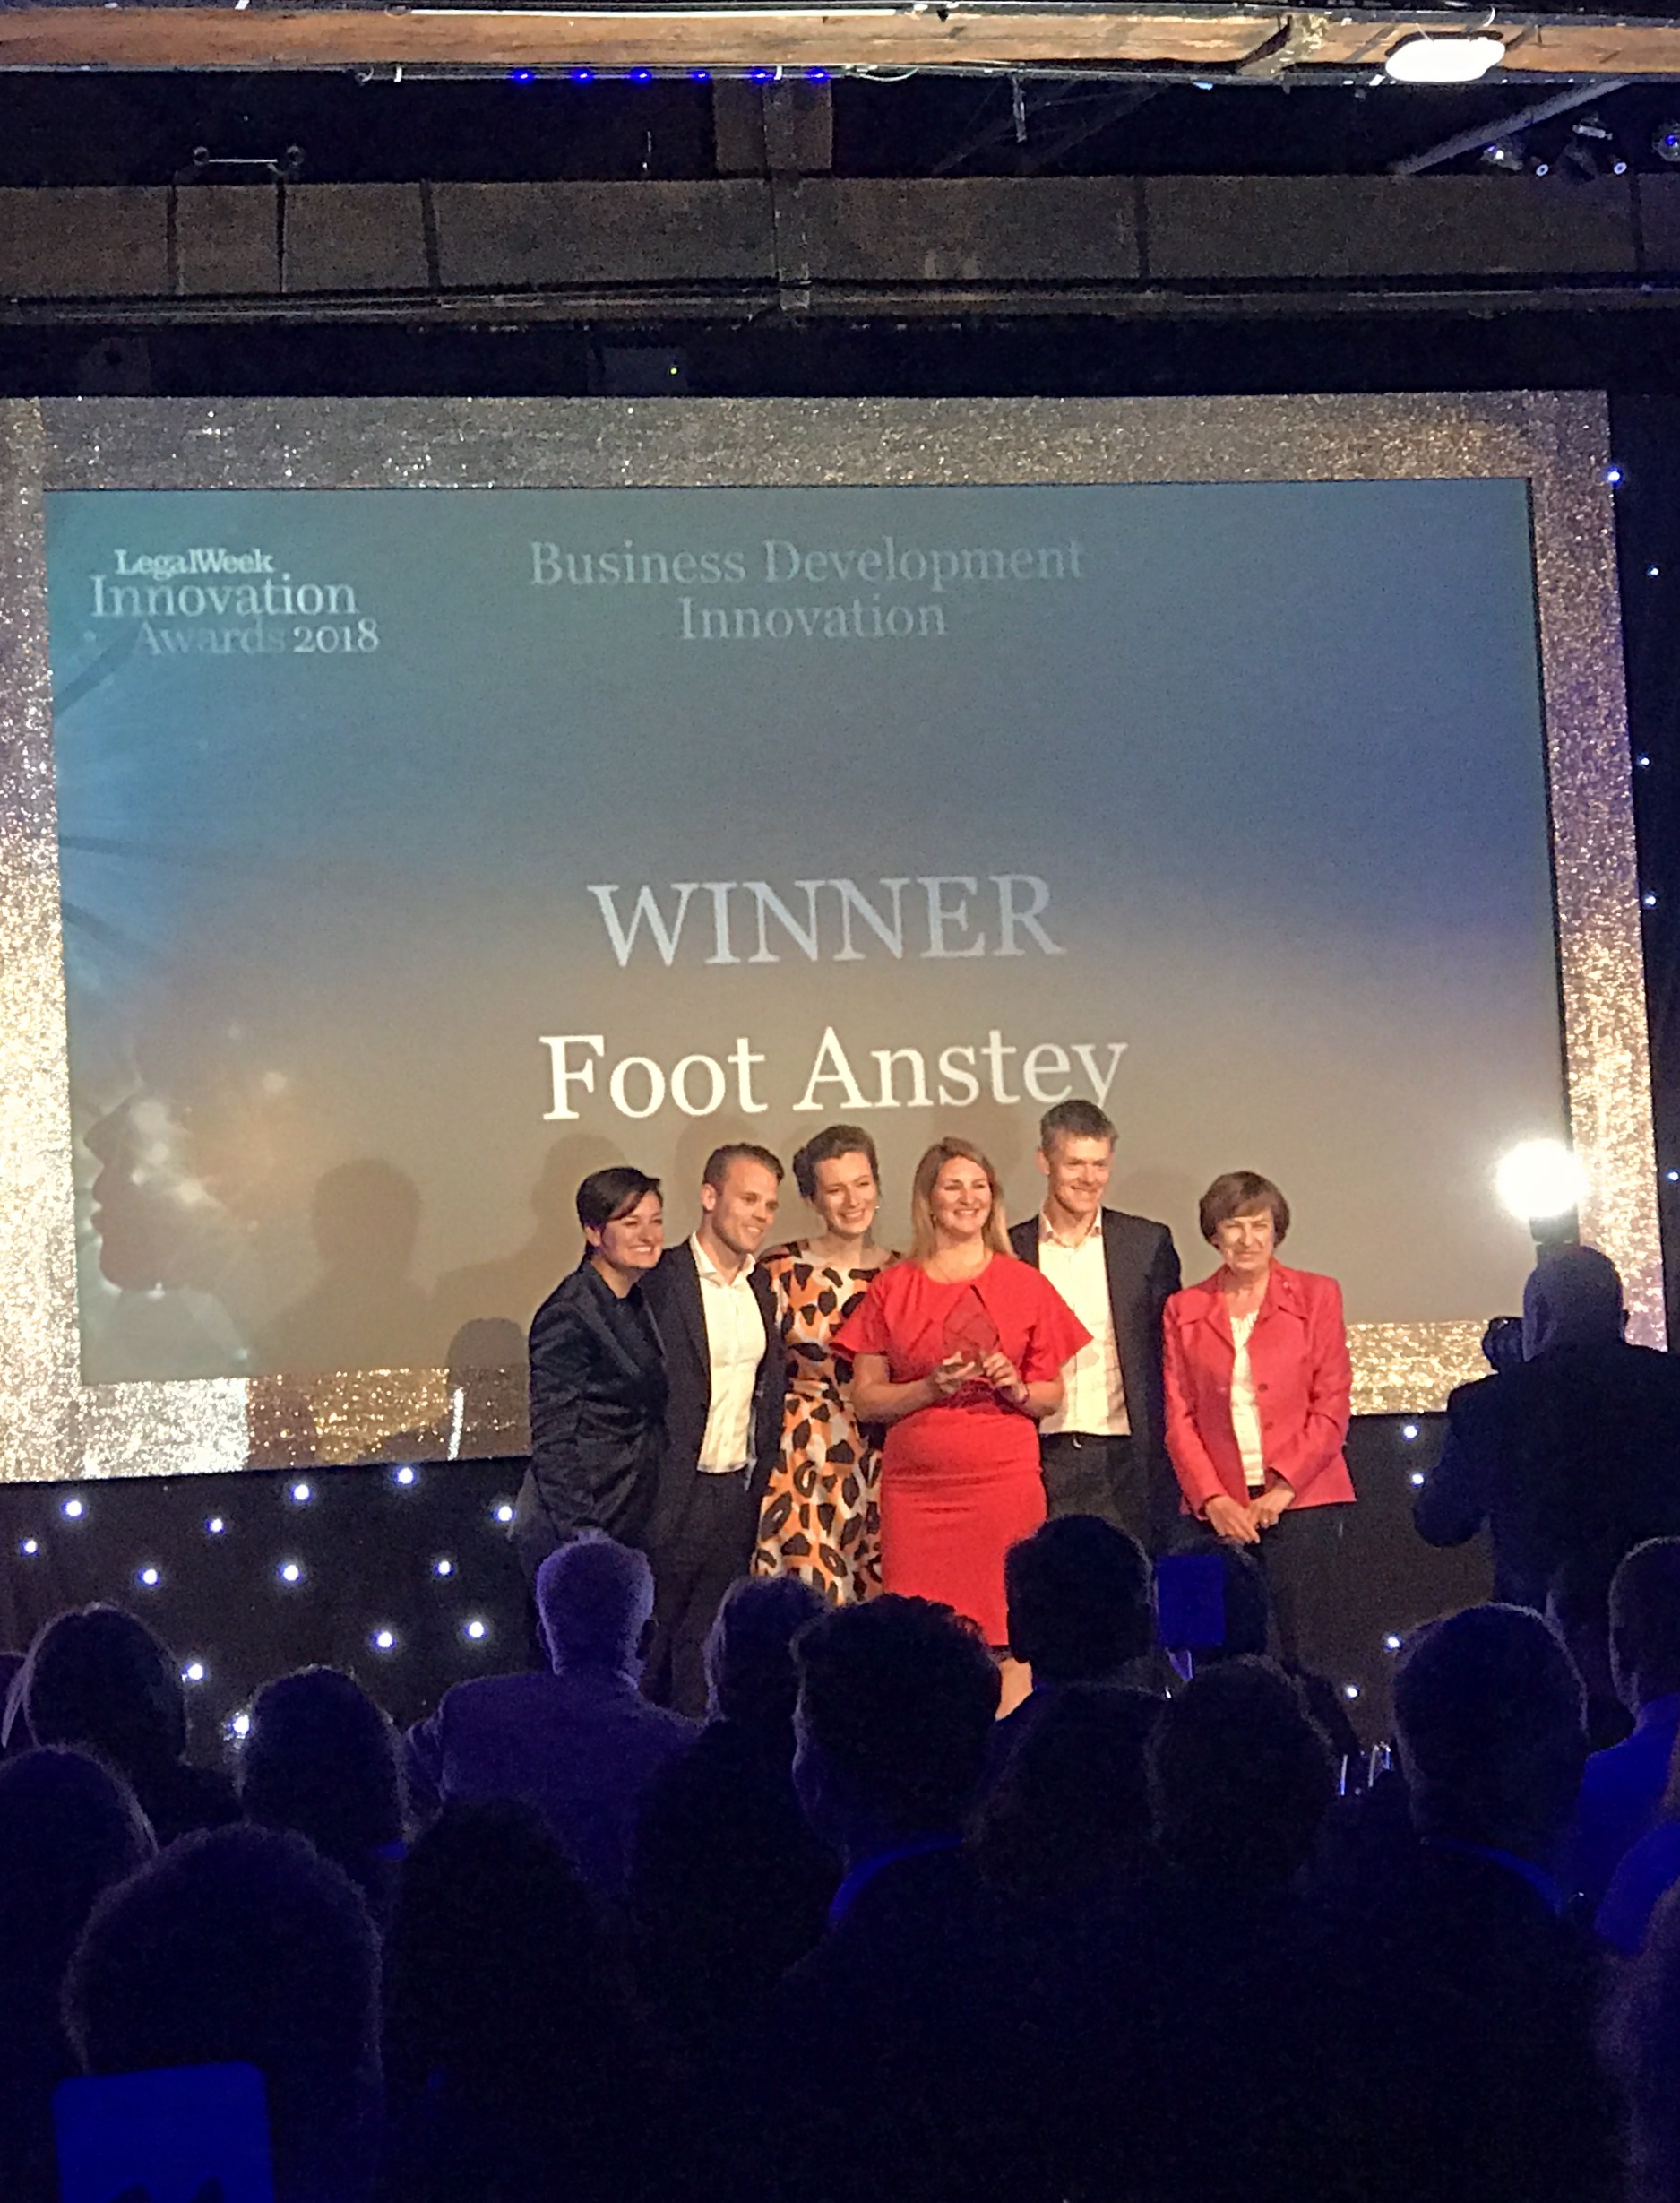 Foot Anstey lands business development award for its innovative trainee programme